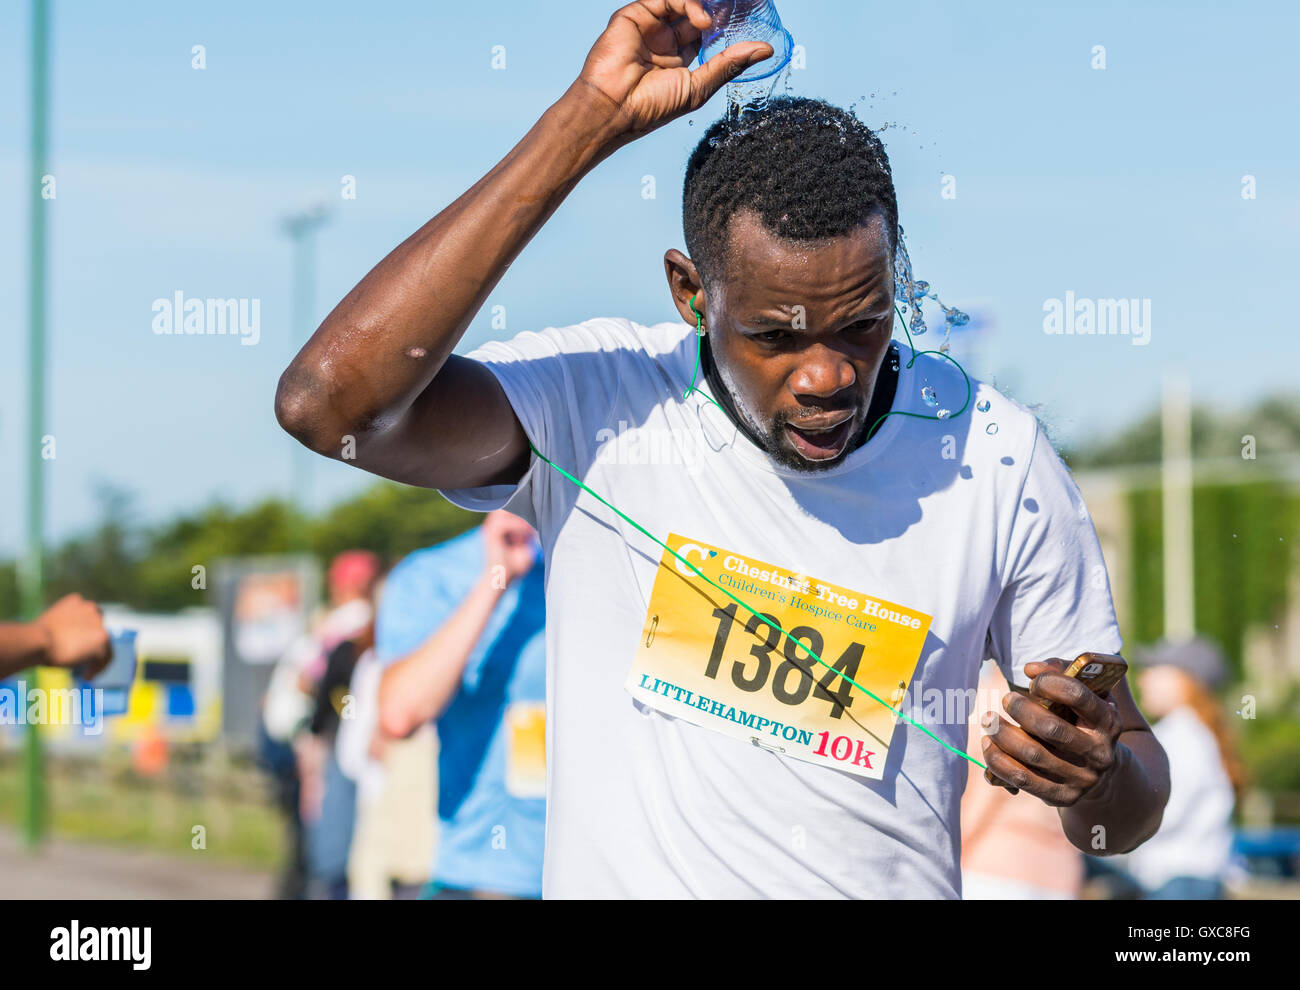 Man cooling off with water while running in a race. Stock Photo